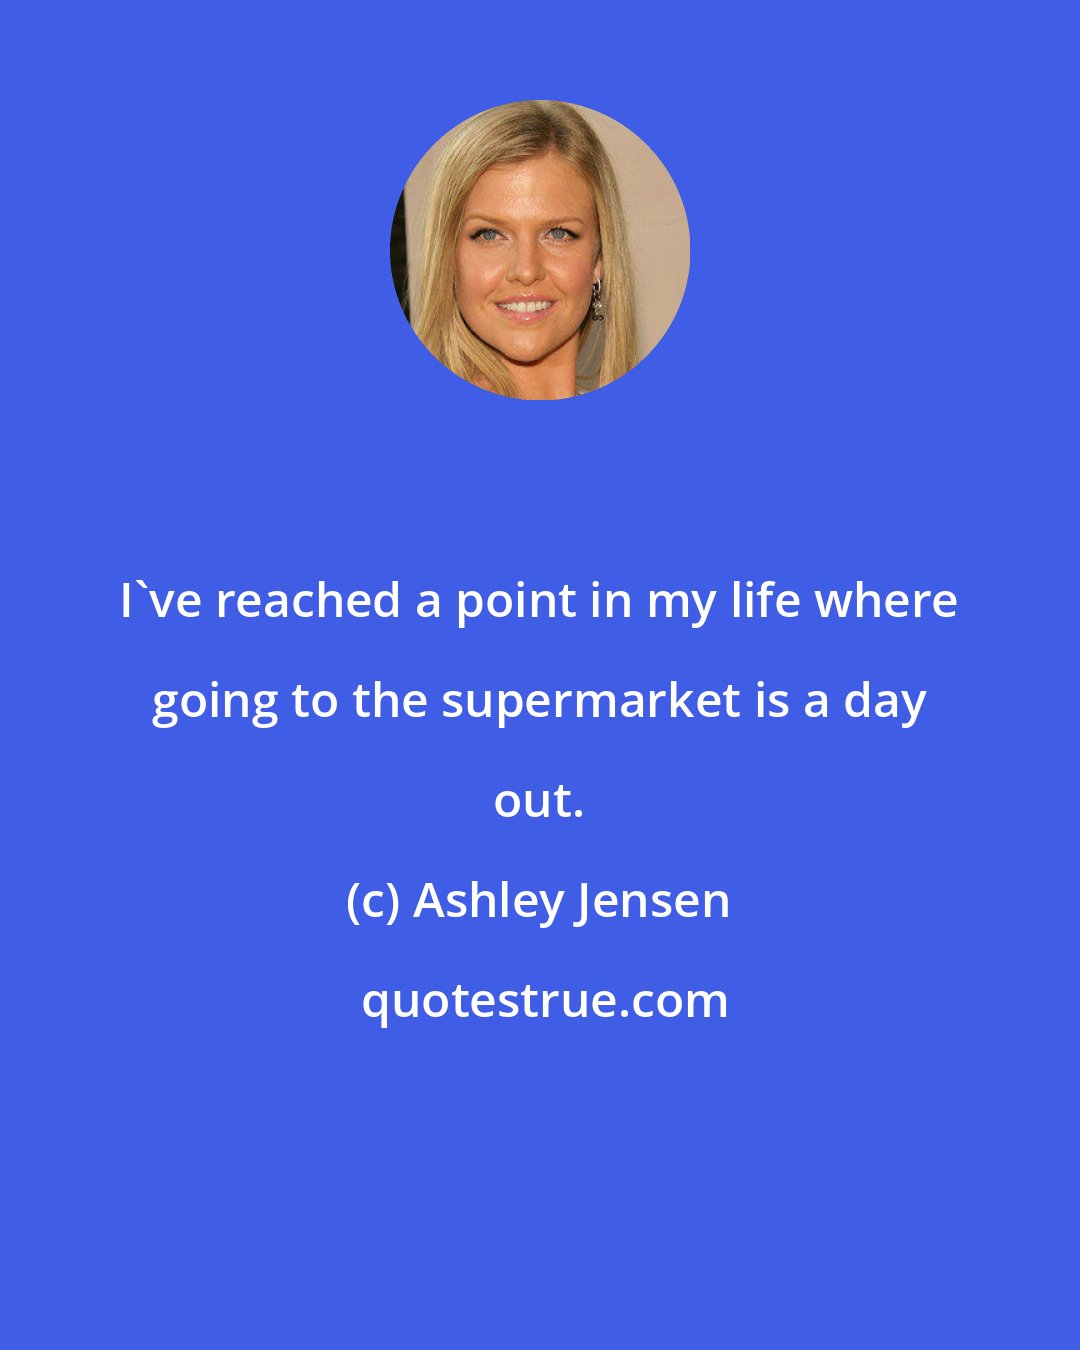 Ashley Jensen: I've reached a point in my life where going to the supermarket is a day out.